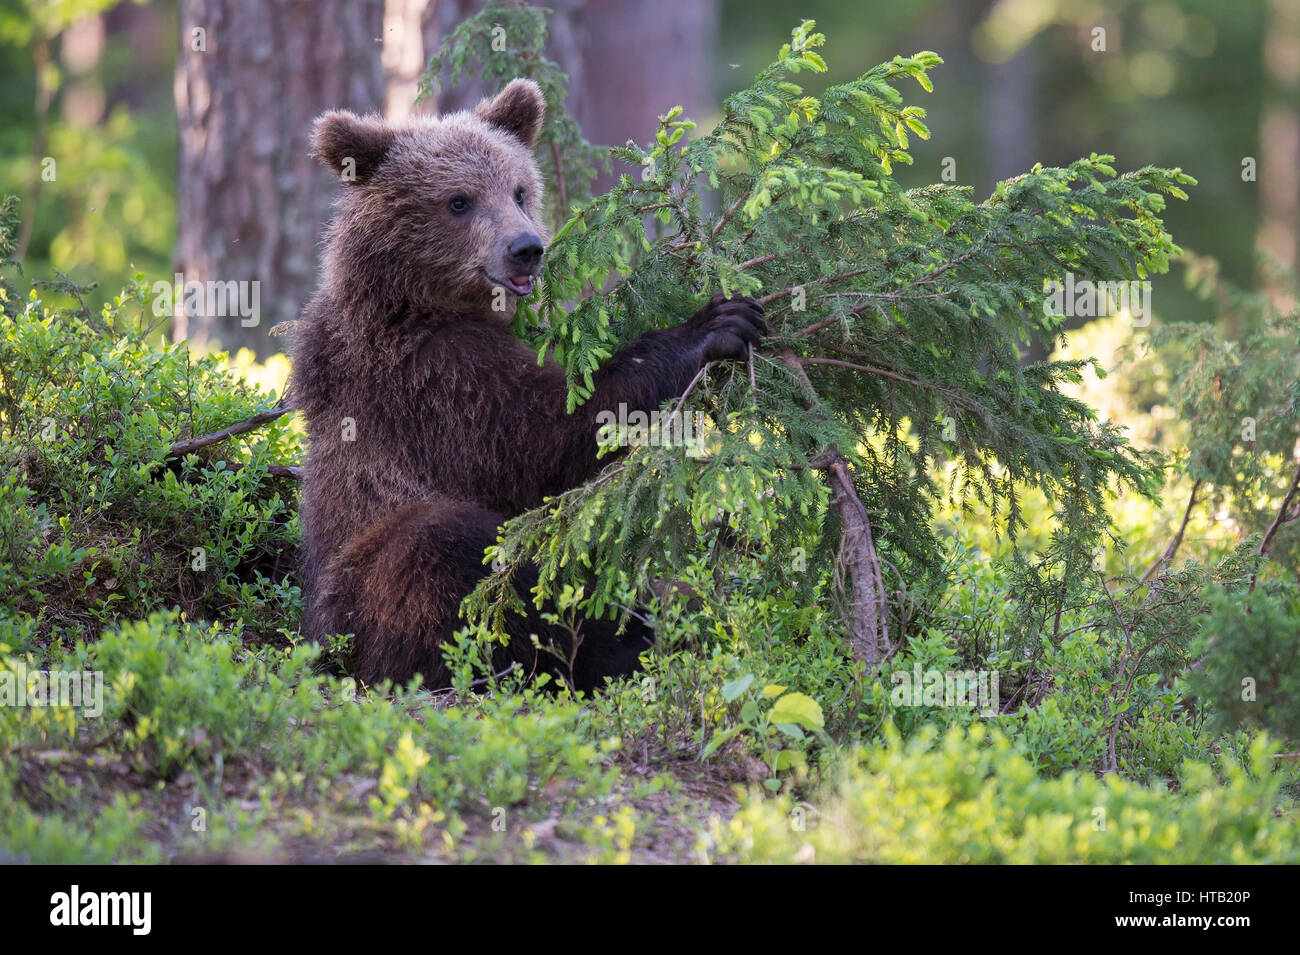 Brown bear with young animal, playing bear in the wood, Braunbaer mit Jungtier, Spielender Baer im Wald Stock Photo